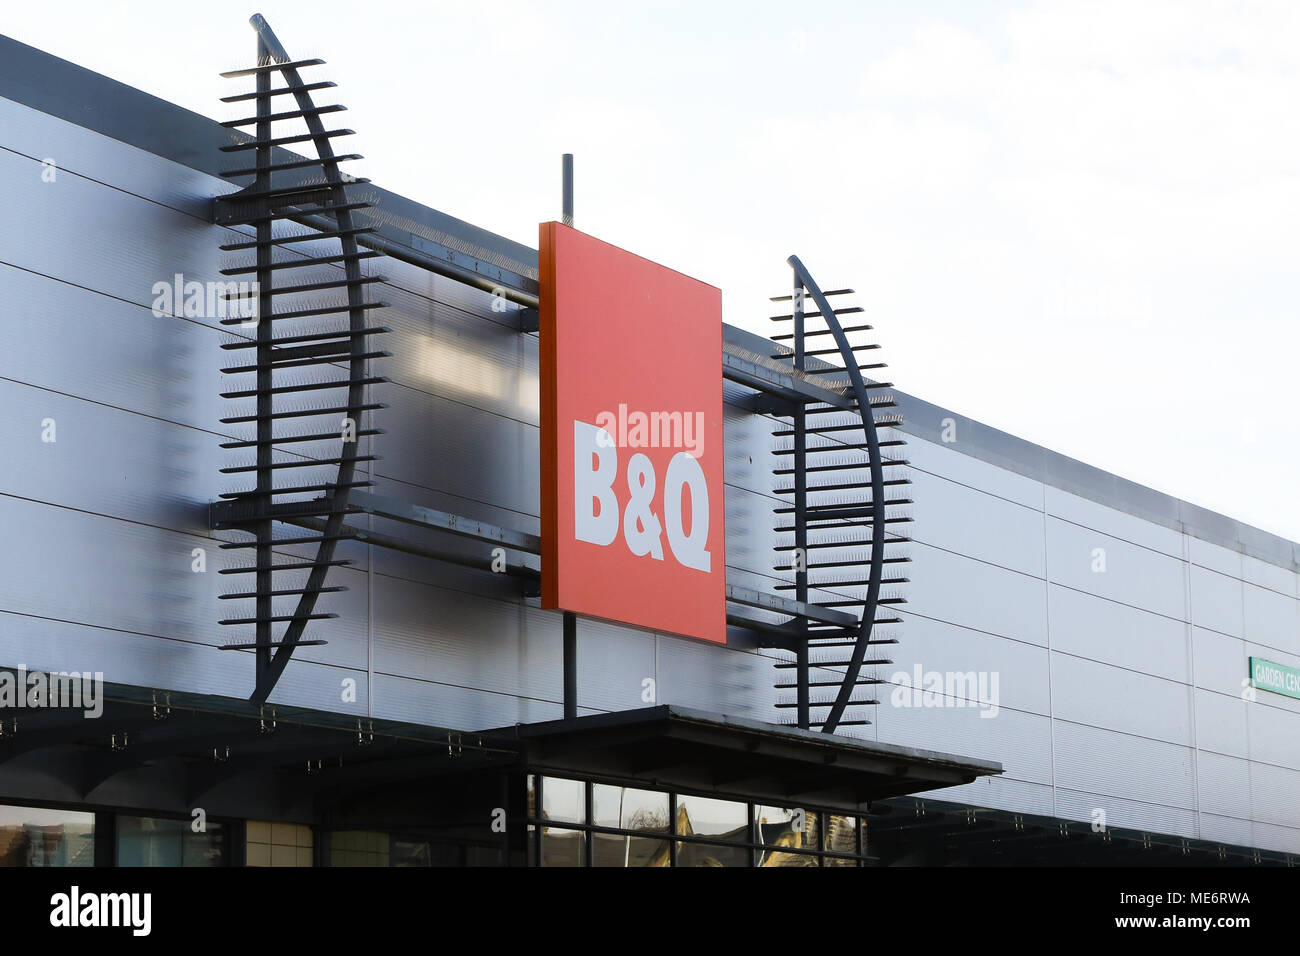 General view of B&Q in Tottenham Hale shopping centre.   B&Q’s owner Kingfisher has reported a drop of more than 10 per cent in their annual profits and warns of an 'uncertain' UK outlook after a recent hit to sales. B&Q is in the middle of an overhaul, which has seen it shut 65 shops and slash around 3,000 jobs in the UK and Ireland over the last two years.   Featuring: Atmosphere, View Where: London, United Kingdom When: 21 Mar 2018 Credit: Dinendra Haria/WENN Stock Photo